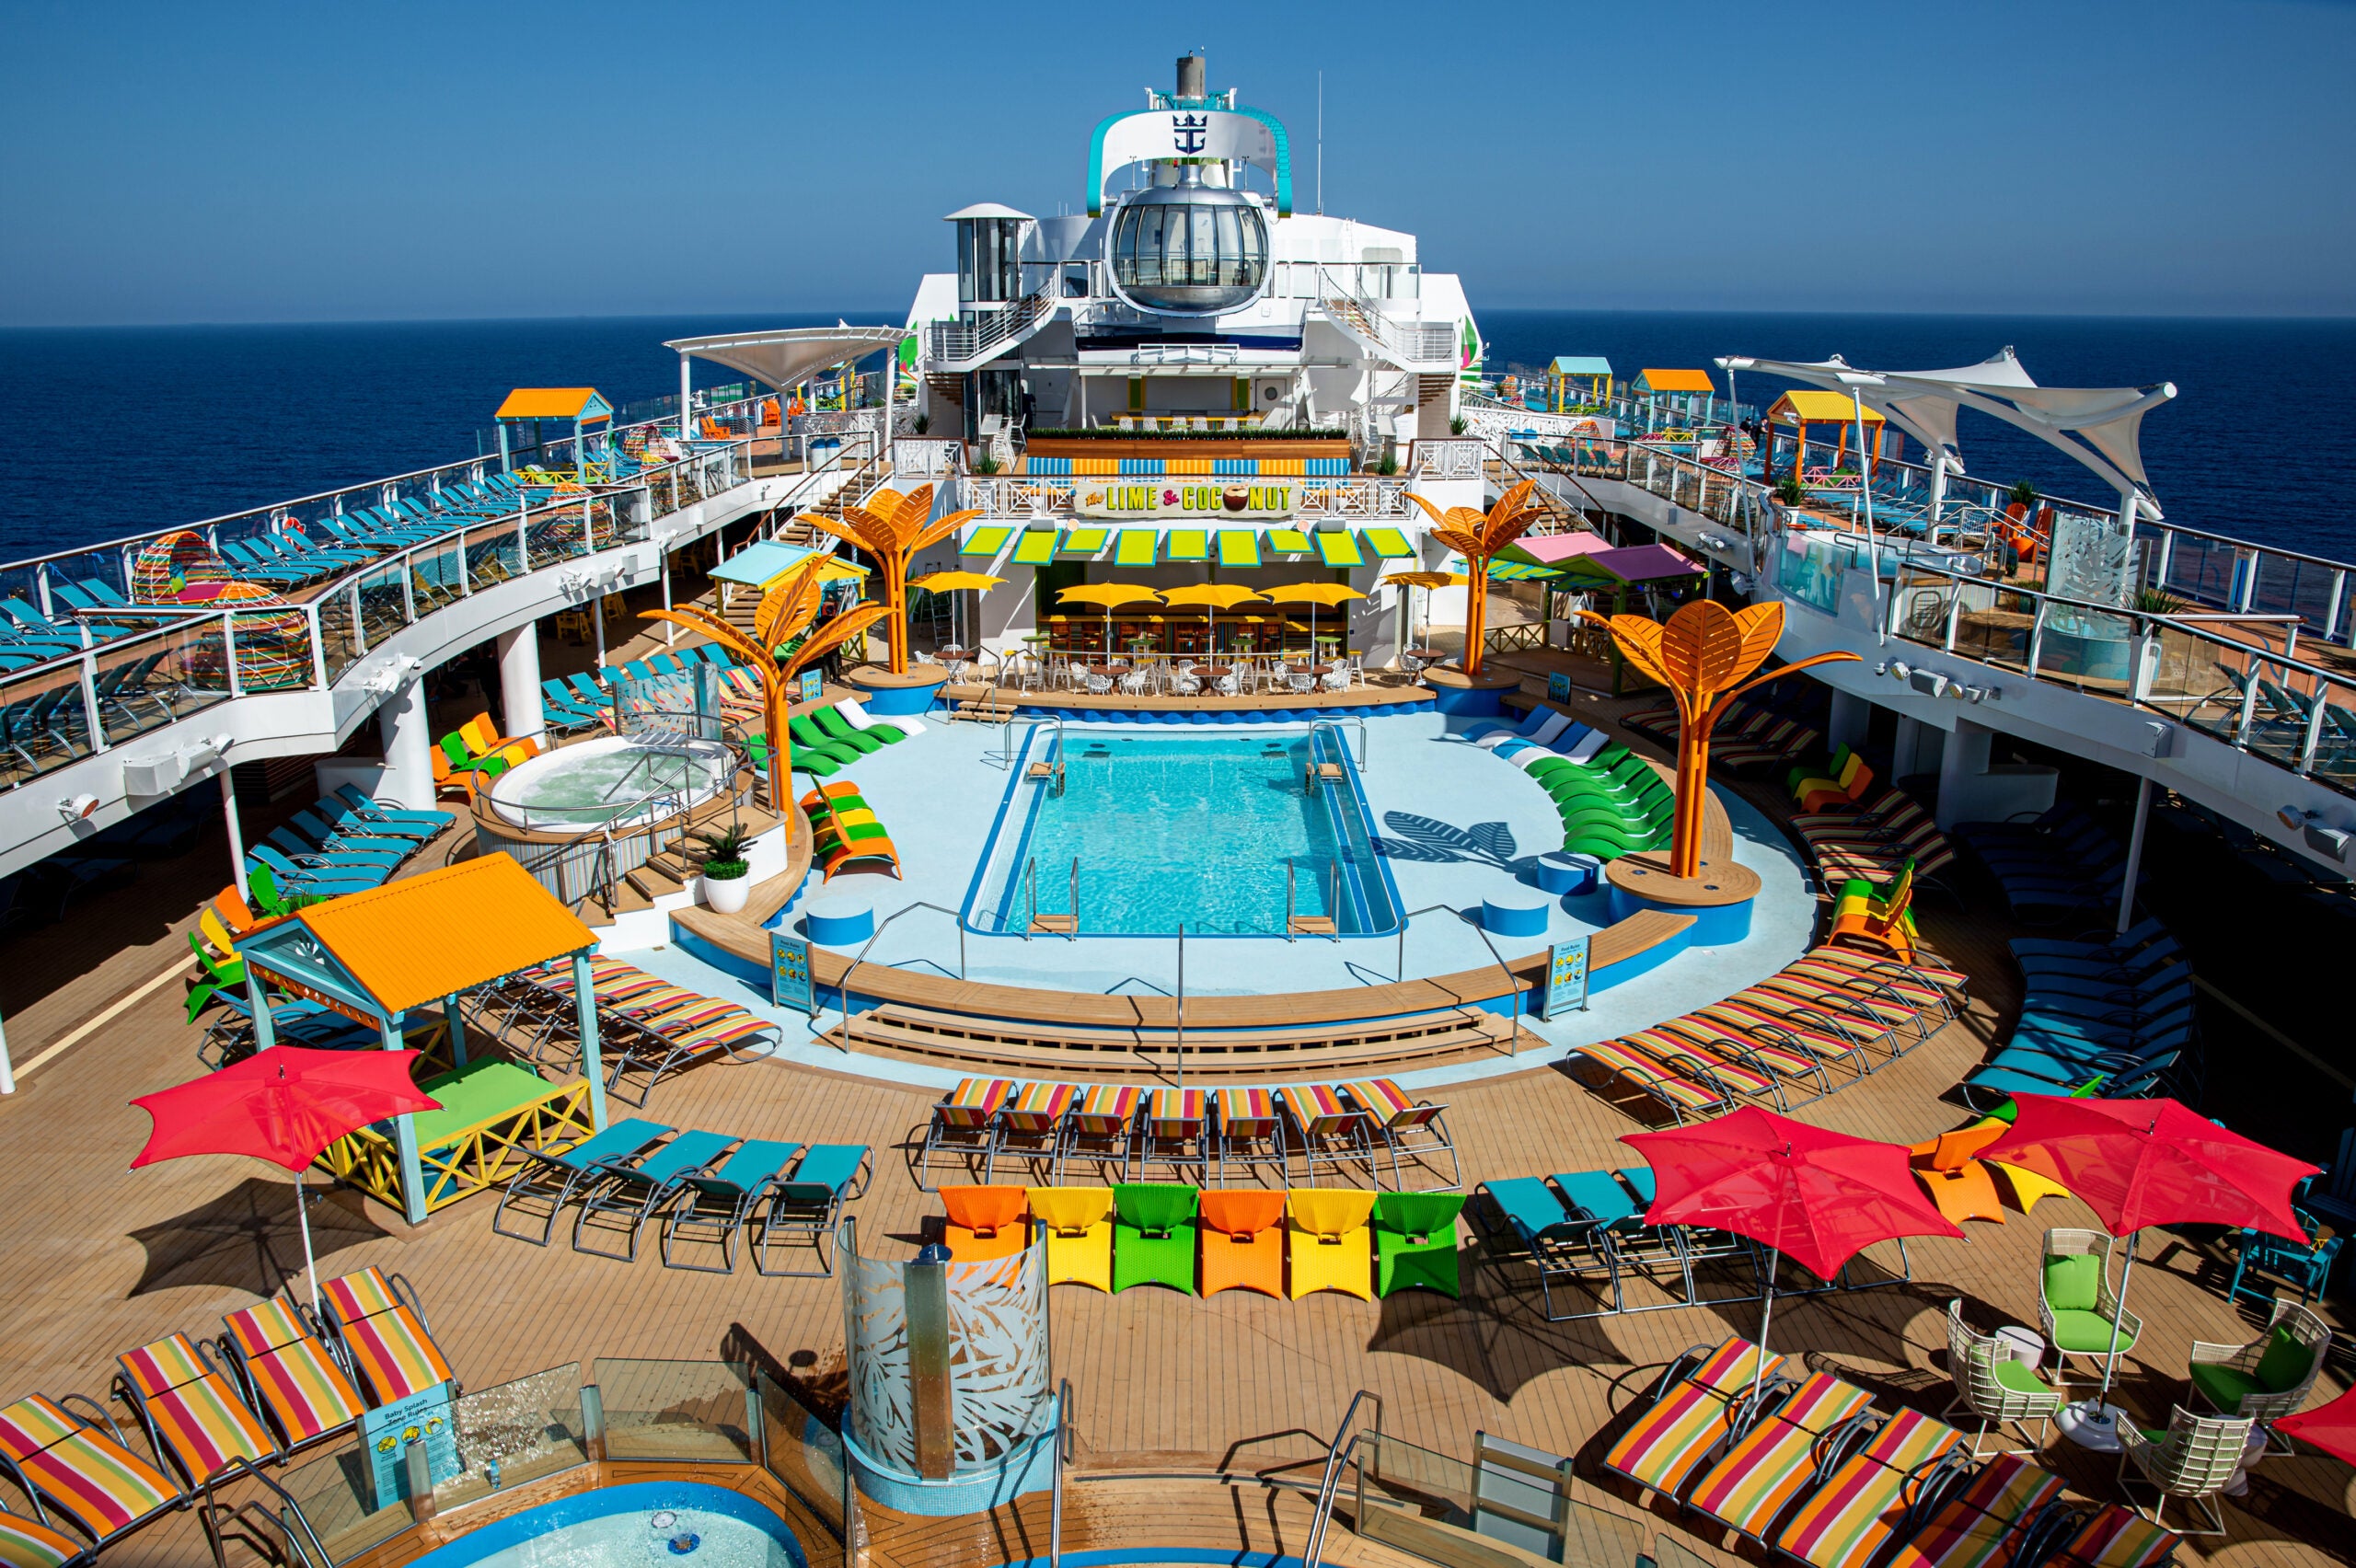 Royal Caribbean cruise ship pool deck with colored lounge chairs and a swimming pool.